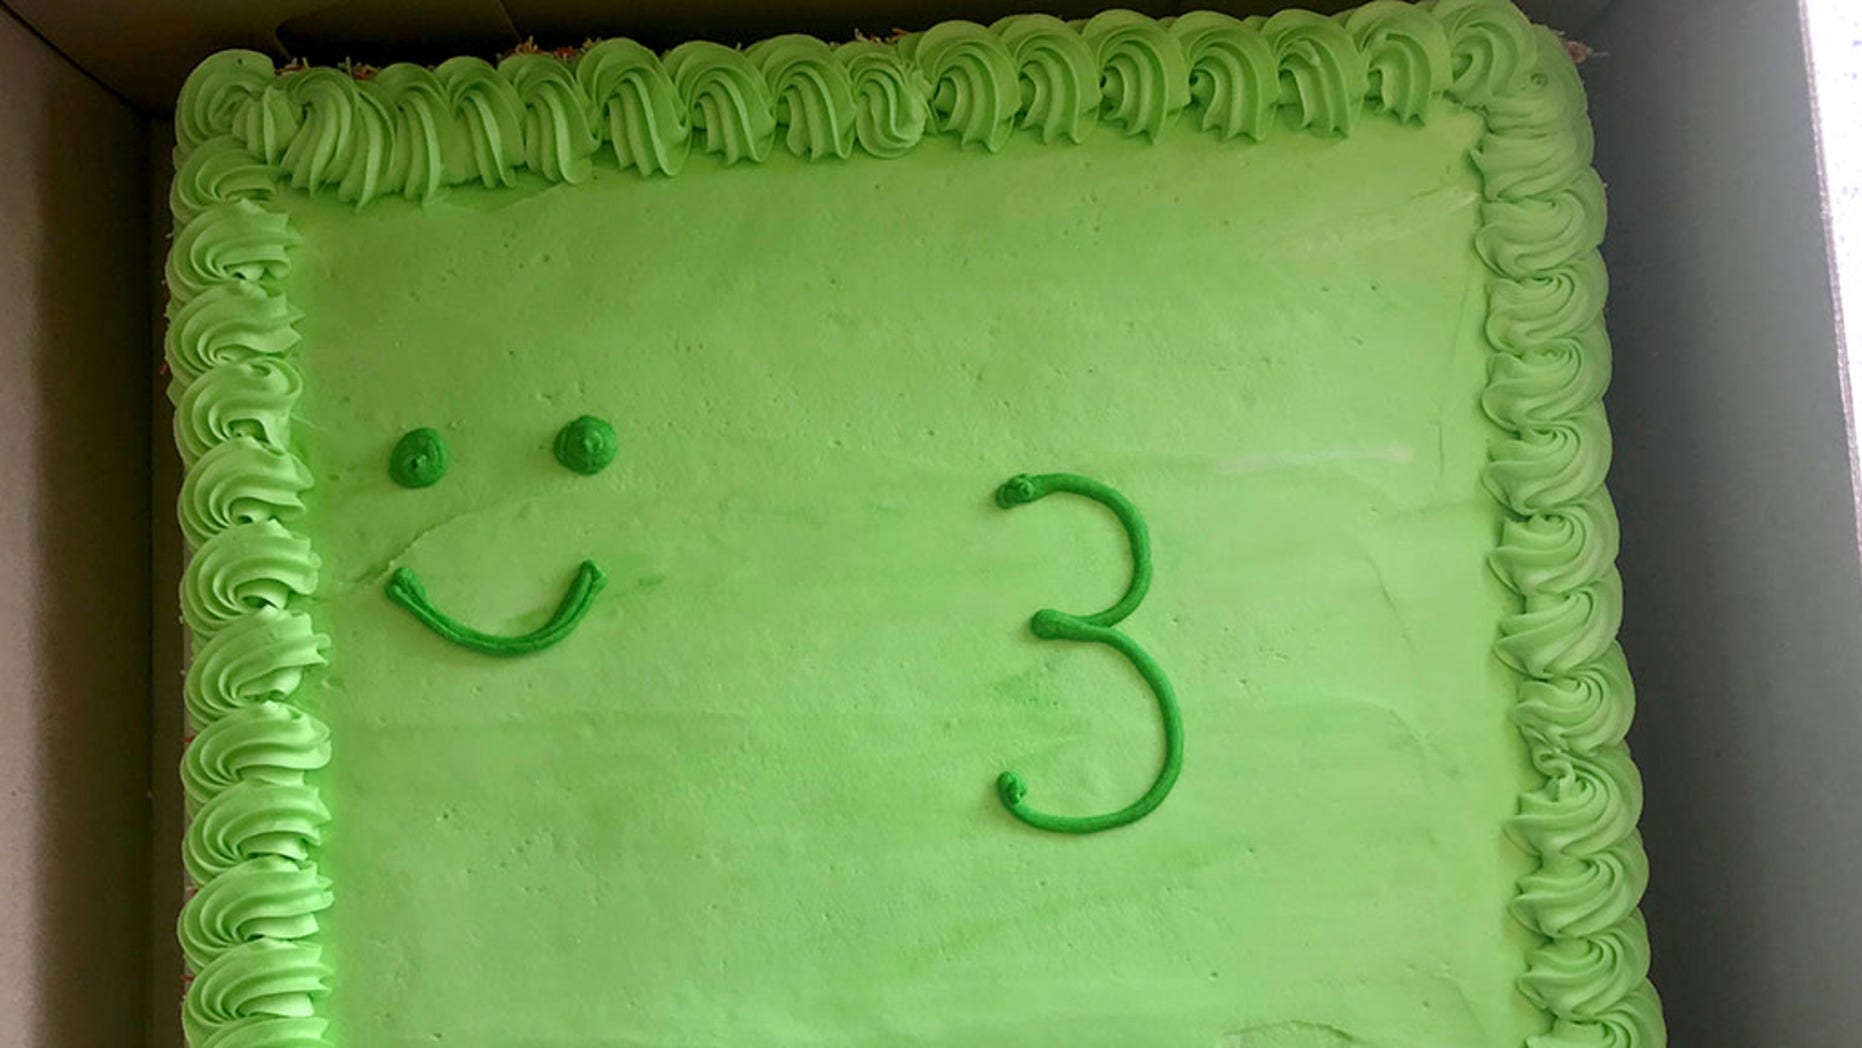 A disgusted dad has slammed an Australian supermarket after they allegedly ruined his son's frog-themed birthday cake with their 'pathetic' decorating skills.